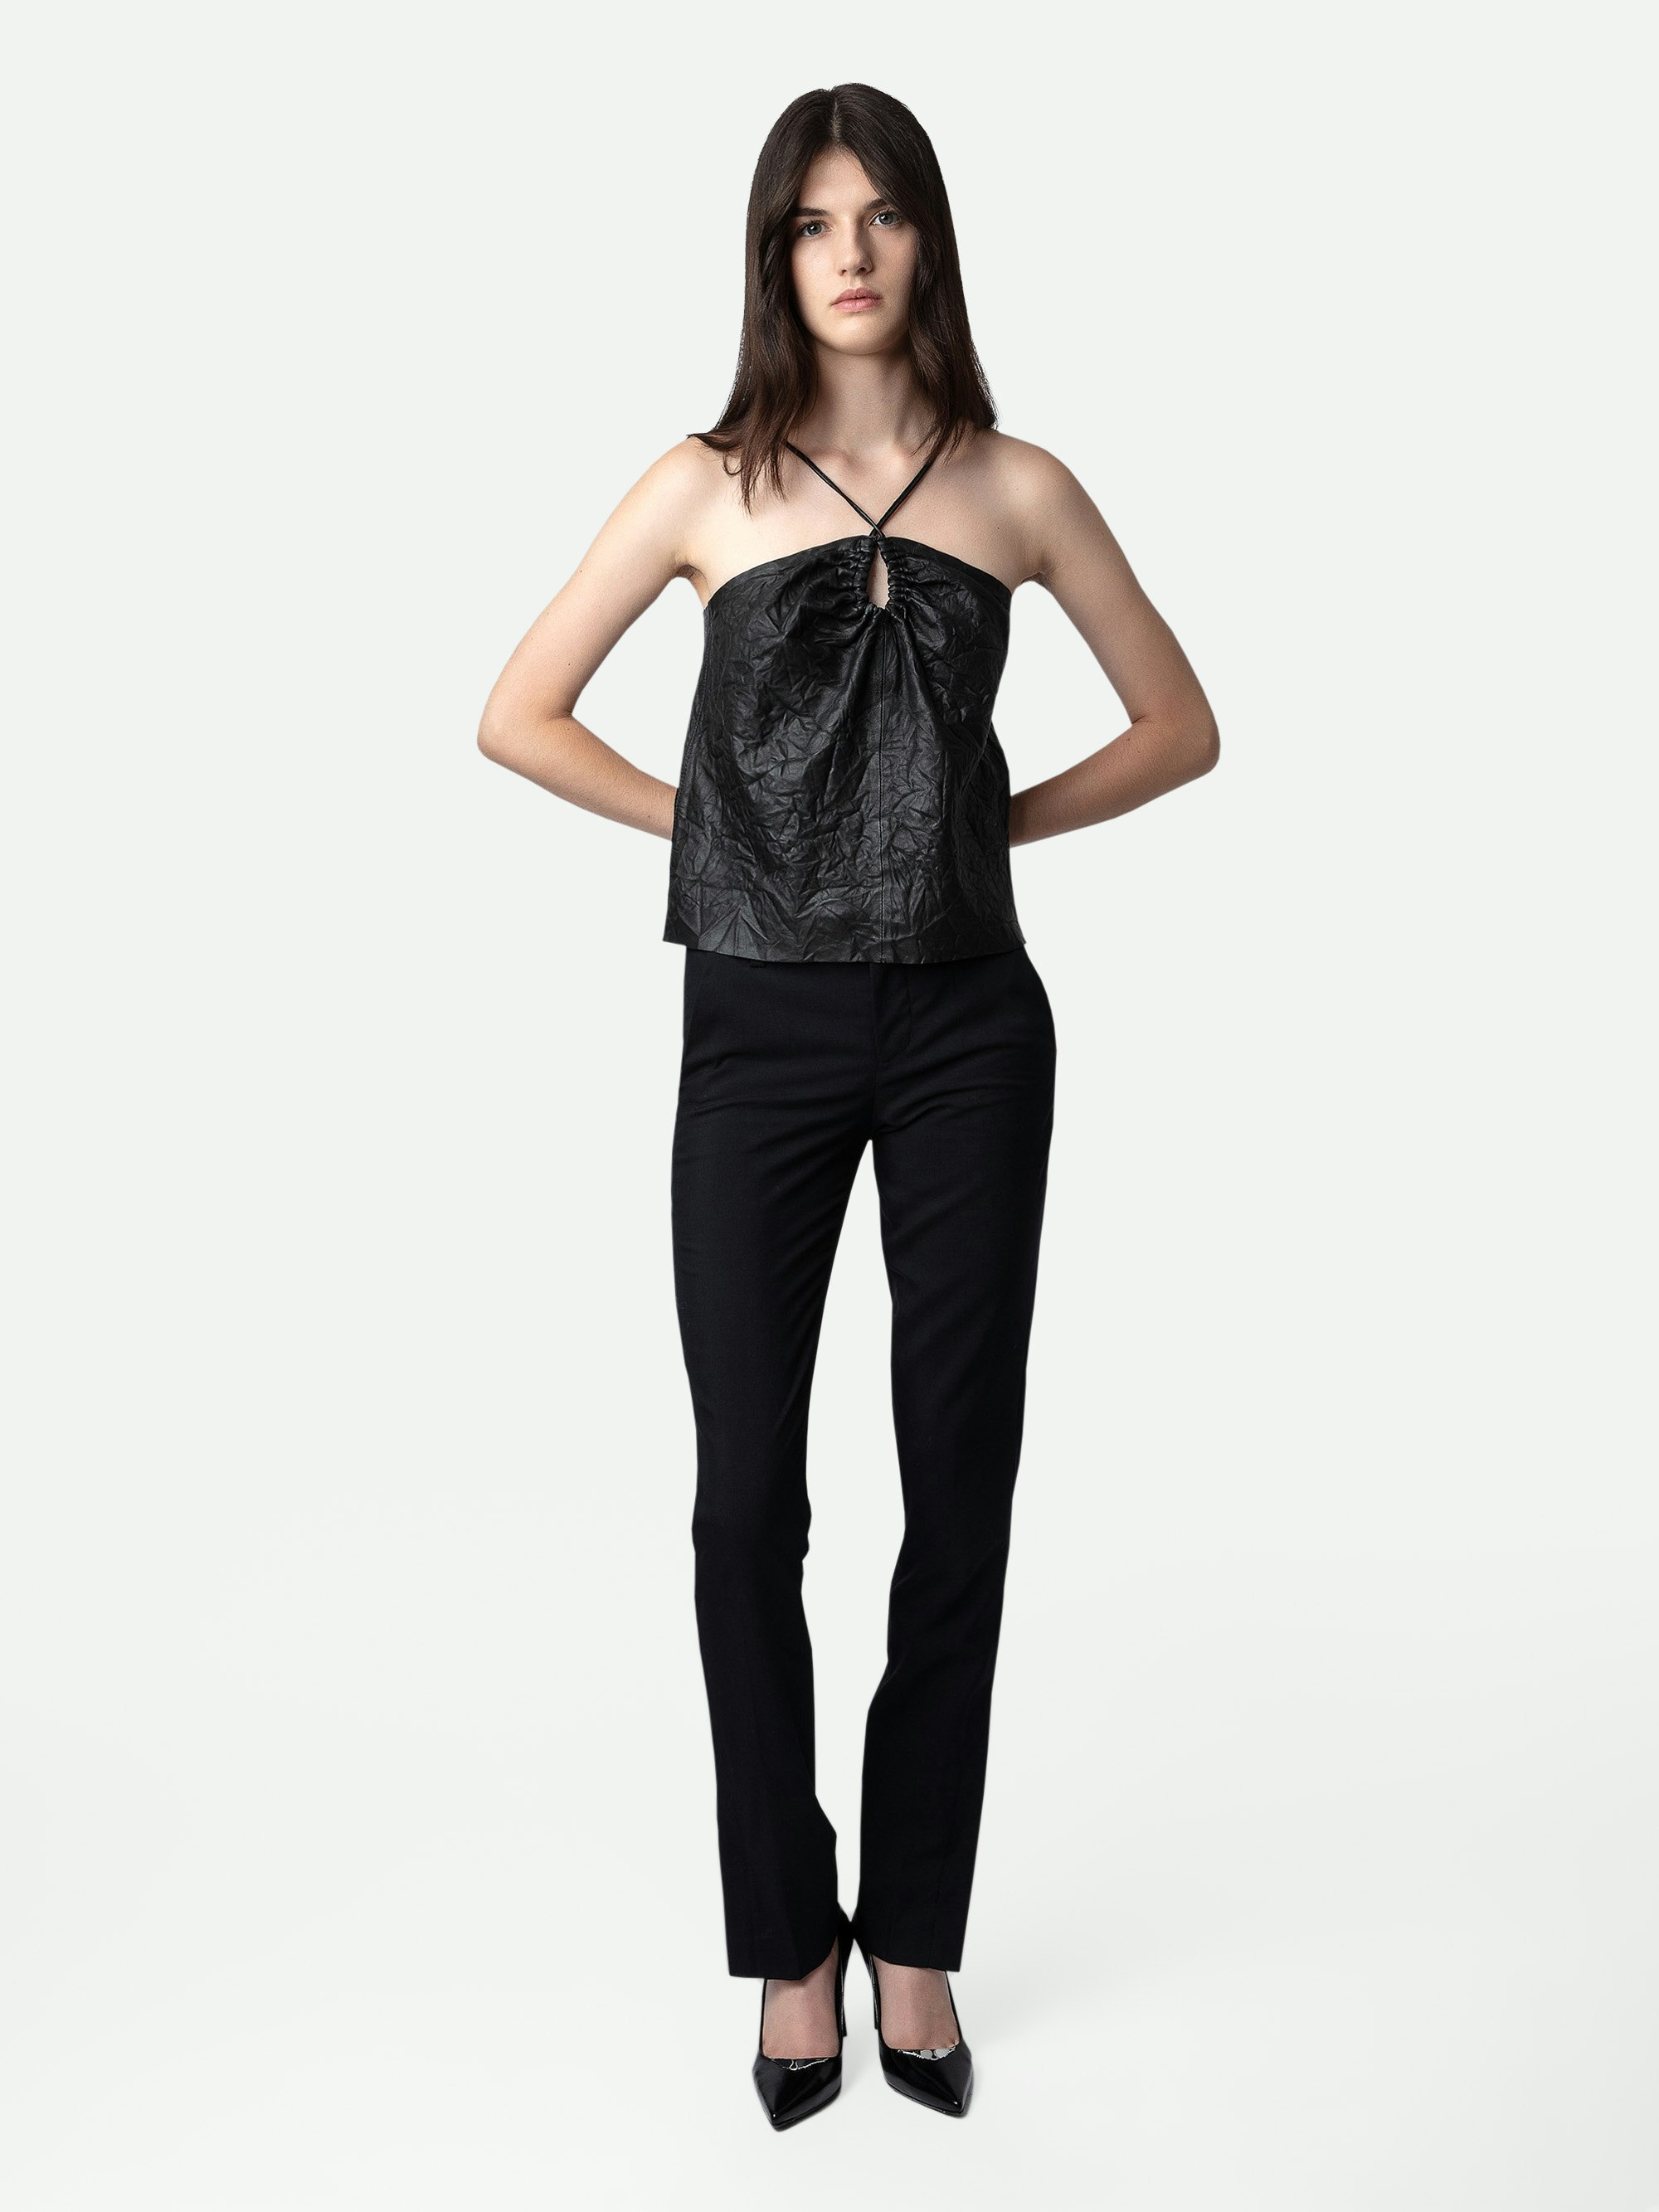 Cidonie Crinkled Leather Top - Women’s black crinkled leather top with drawstring straps.